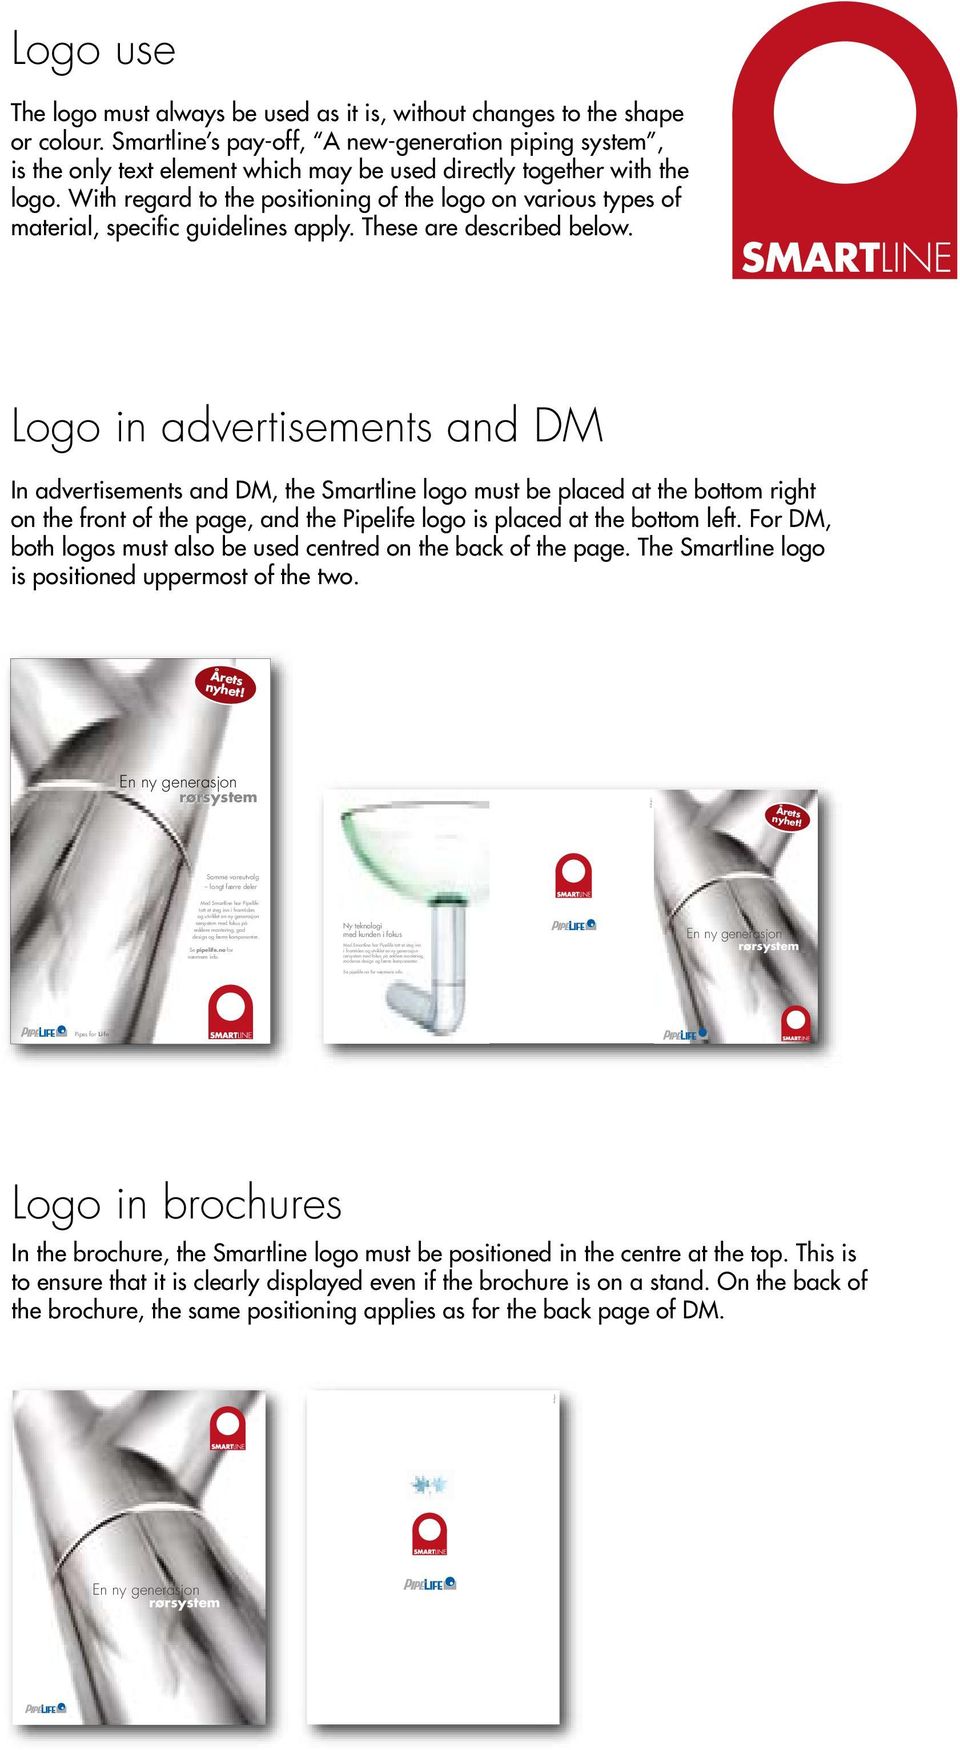 With regard to the positioning of the logo on various types of material, specific guidelines apply. These are described below.